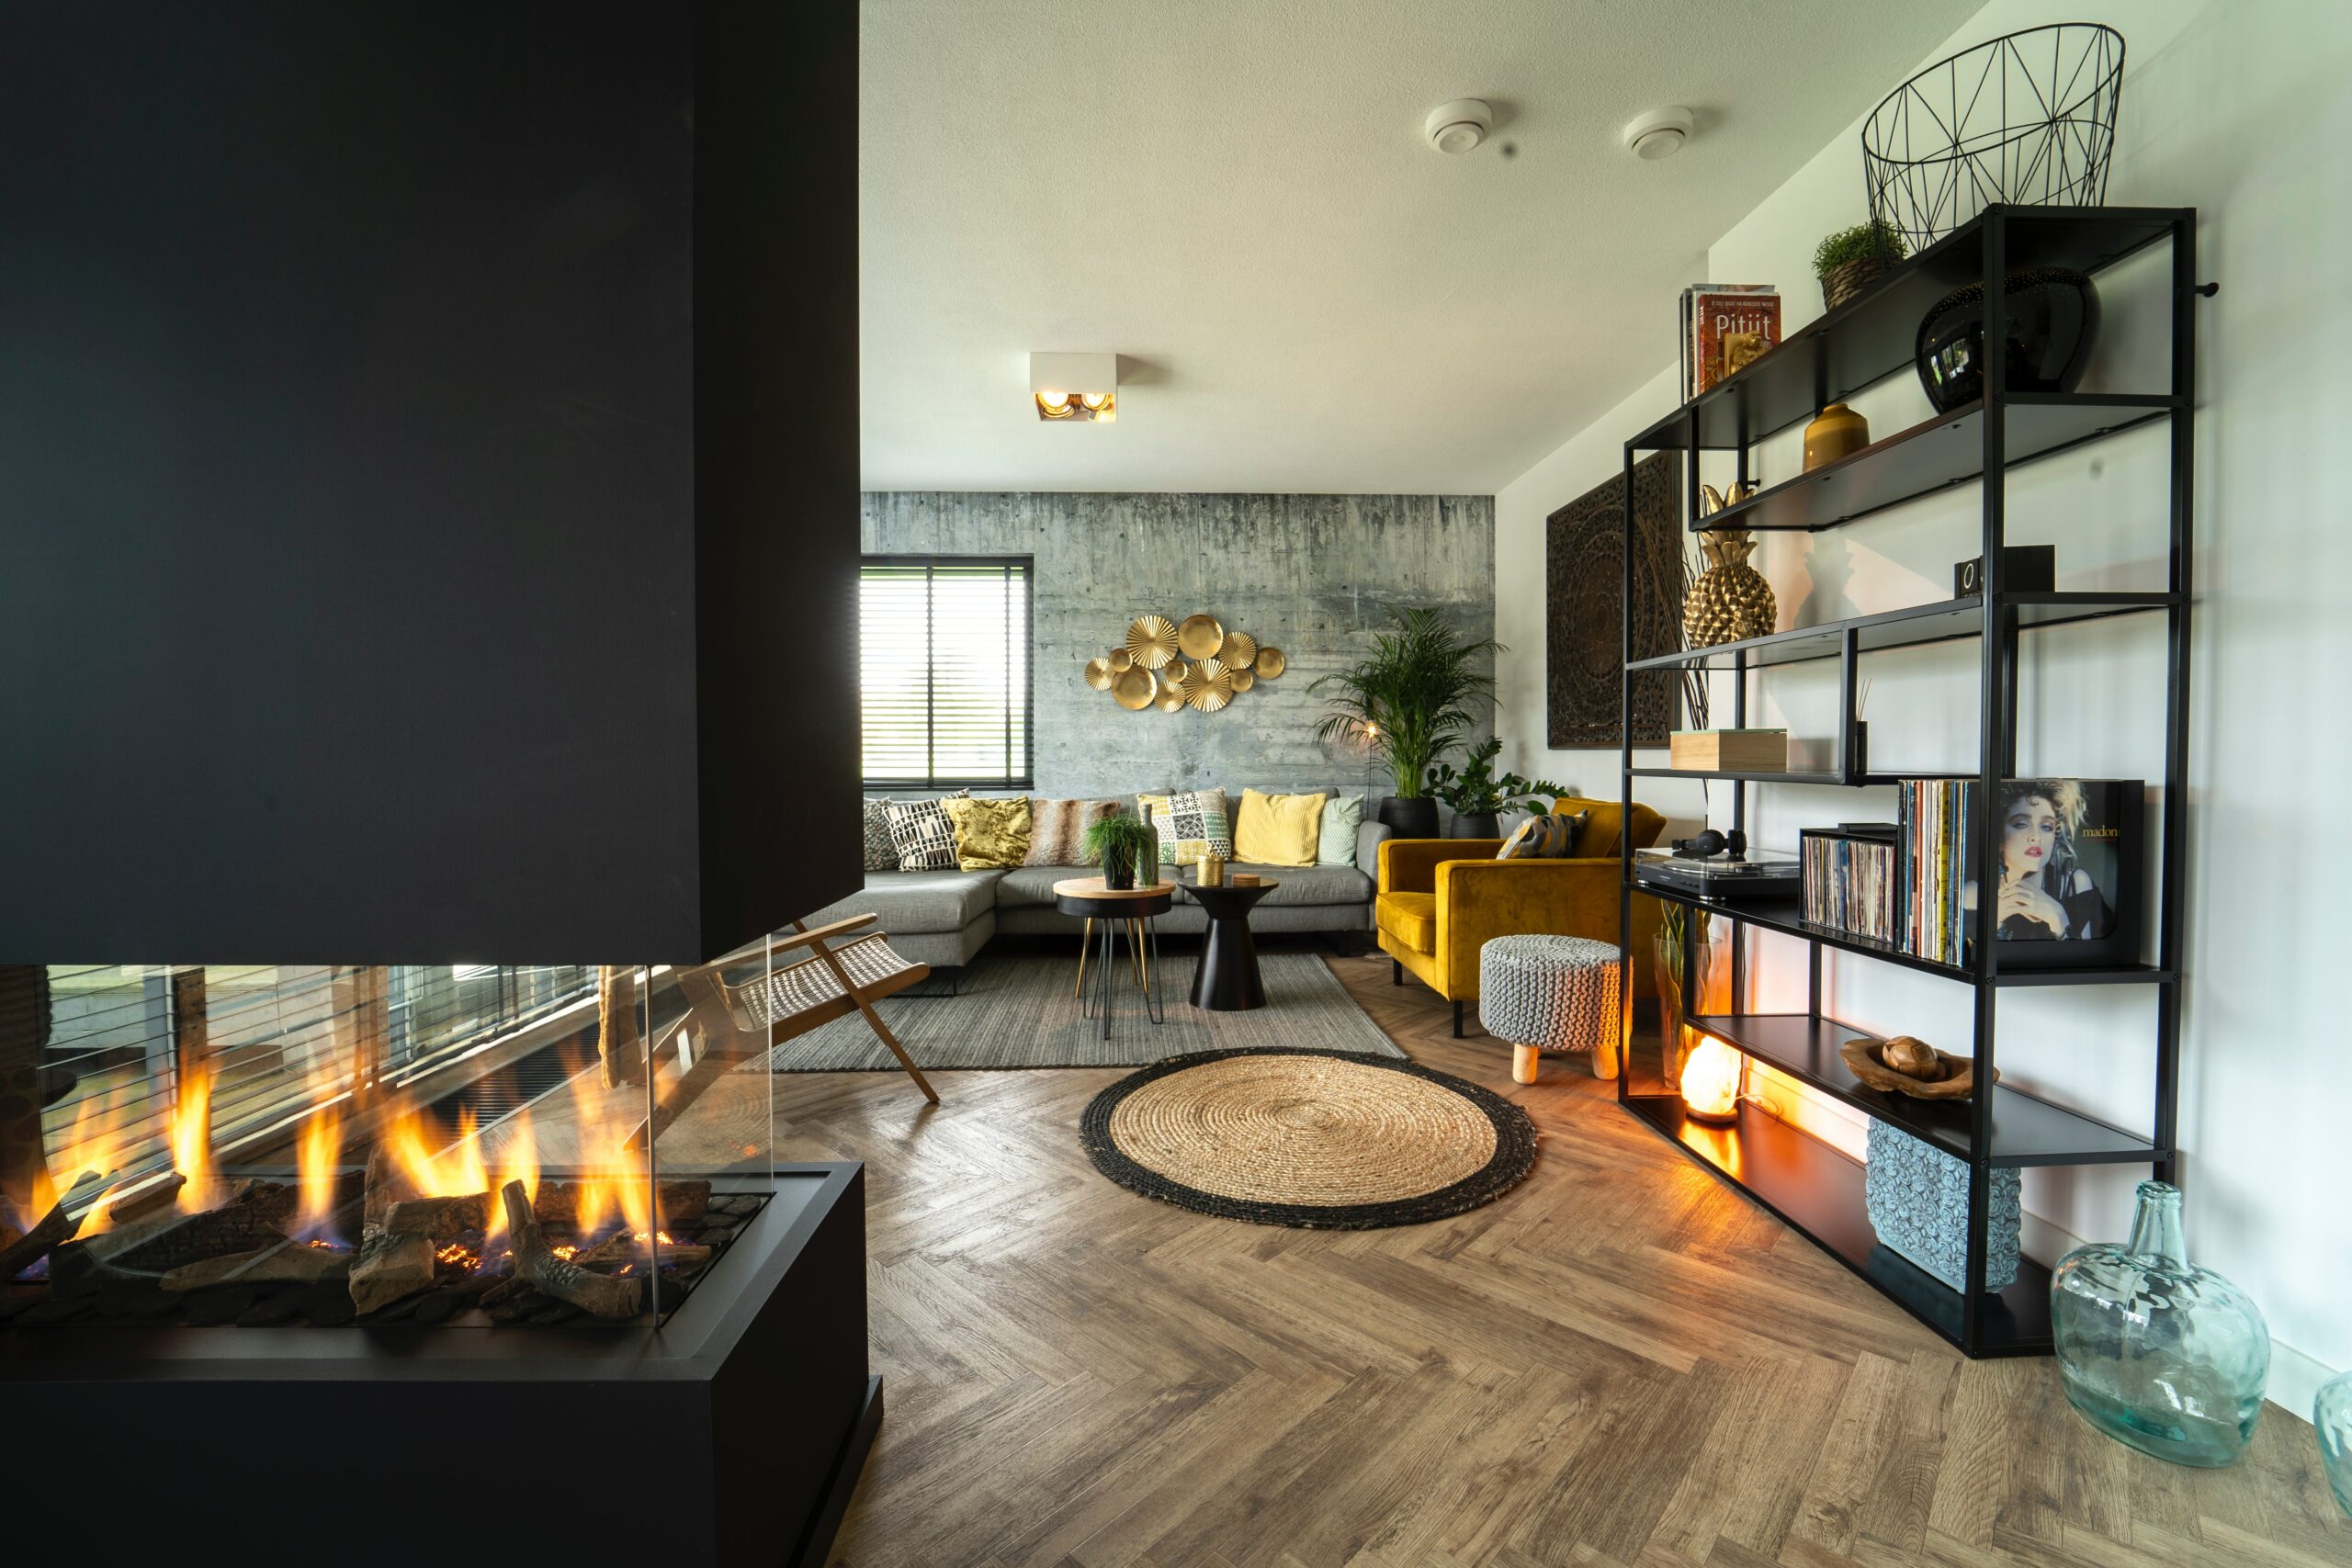 How efficient are different types of fireplaces